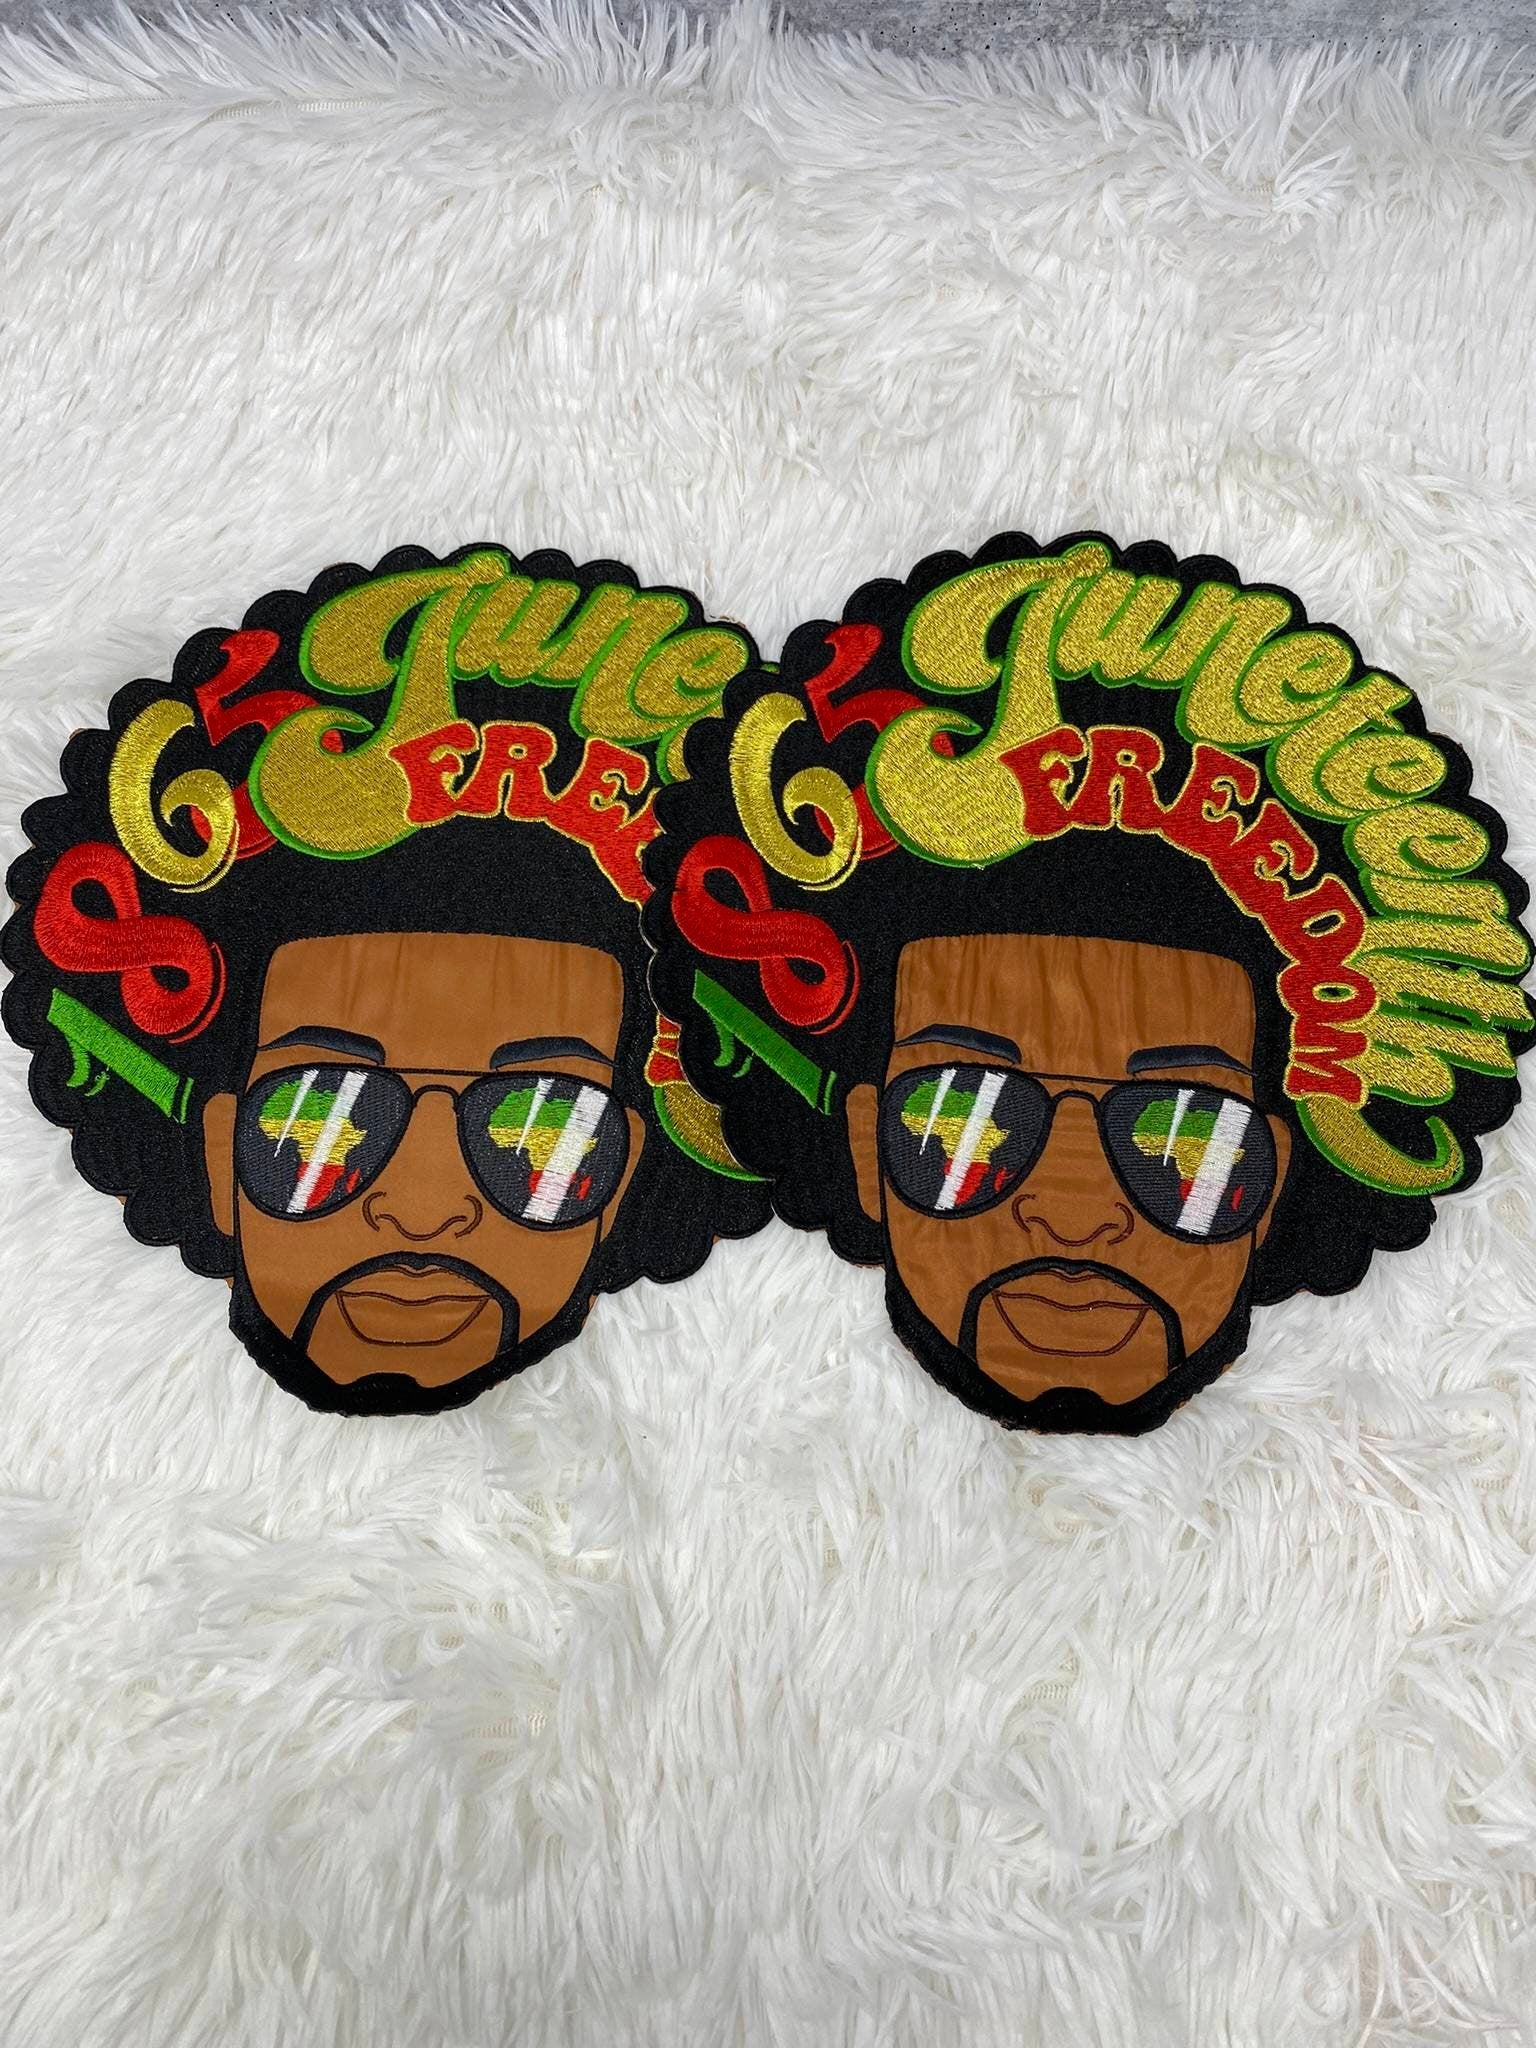 One-of-a-kind, 1865 Juneteenth 1-pc Iron-On "Afro King" Patch; Juneteenth Accessories for Clothing, Large Jacket Patch, Limited Edition